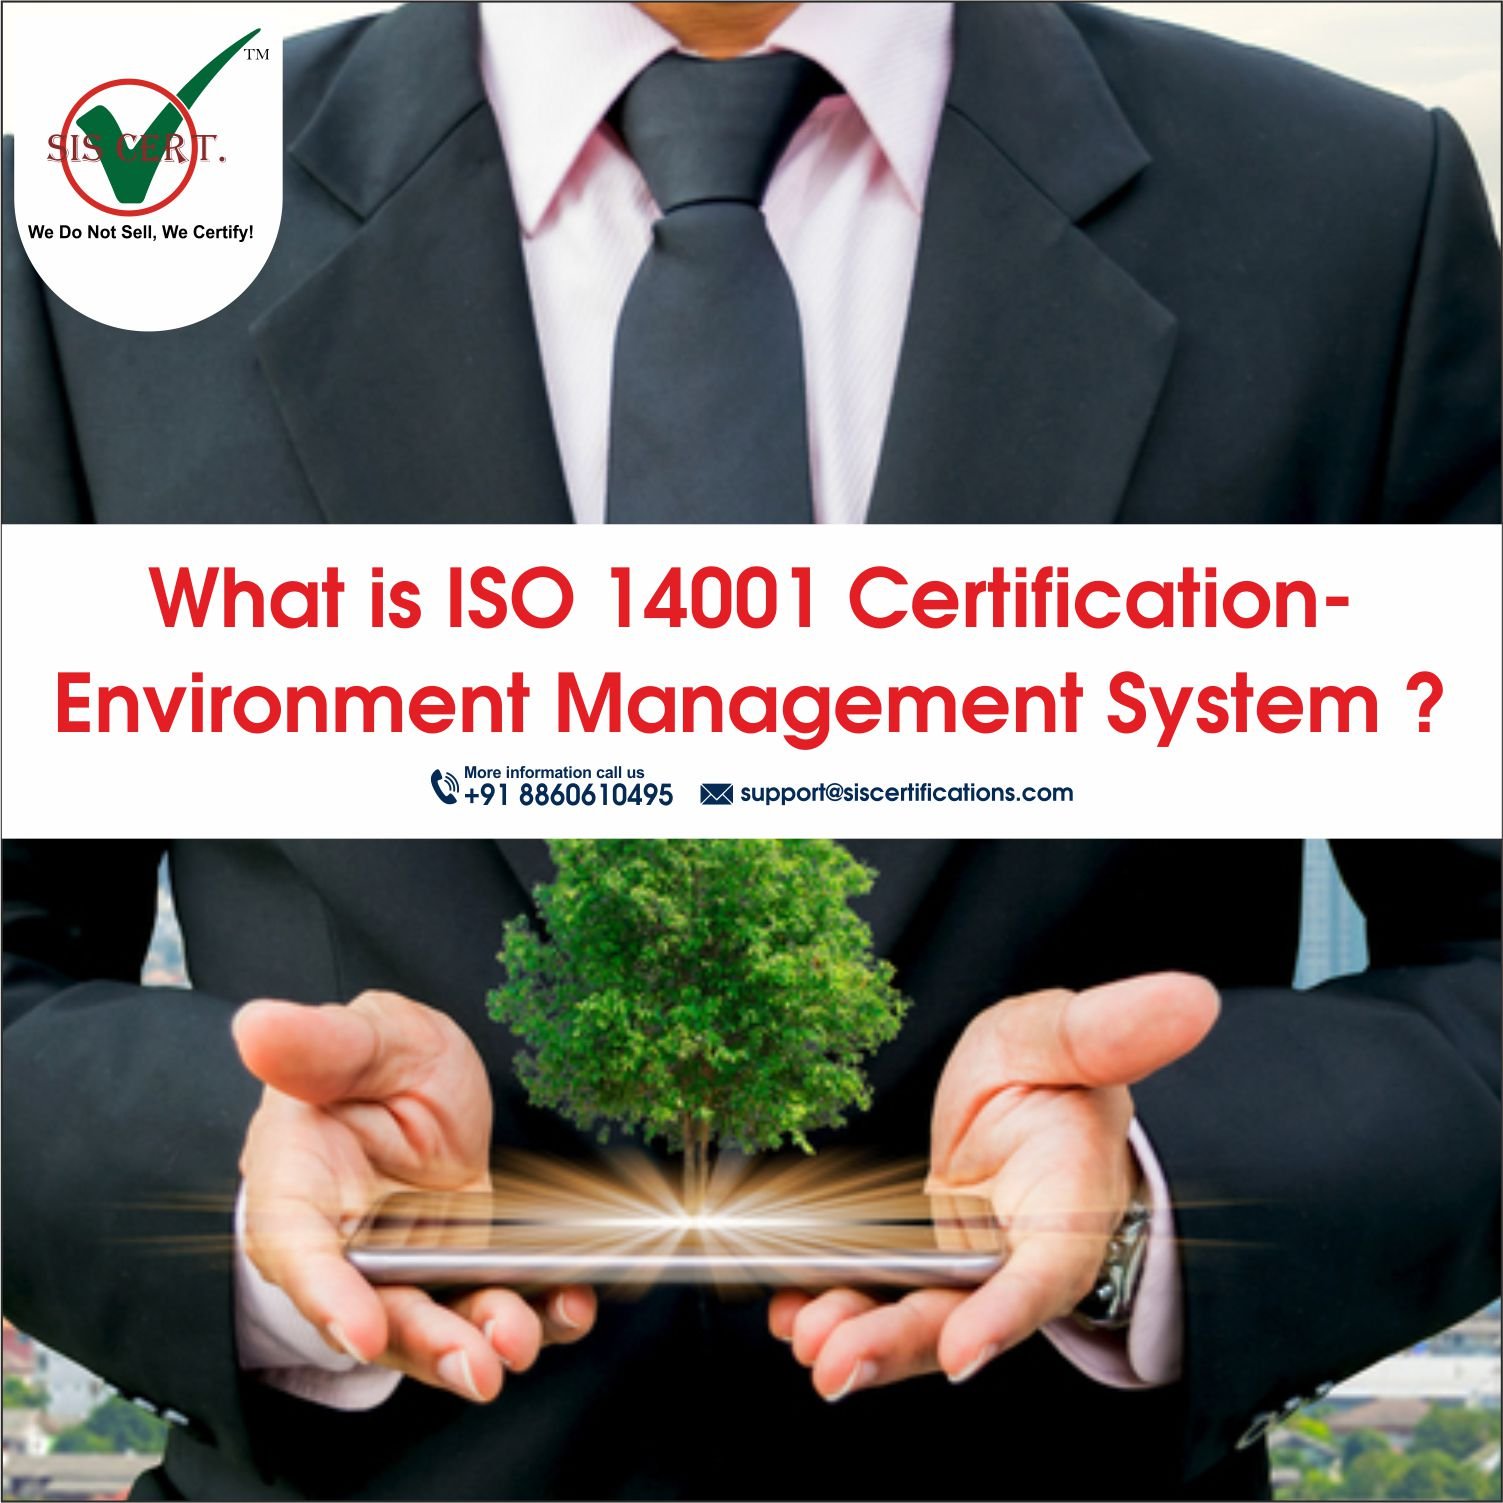 What is ISO 14001 Certification- Environment Management System